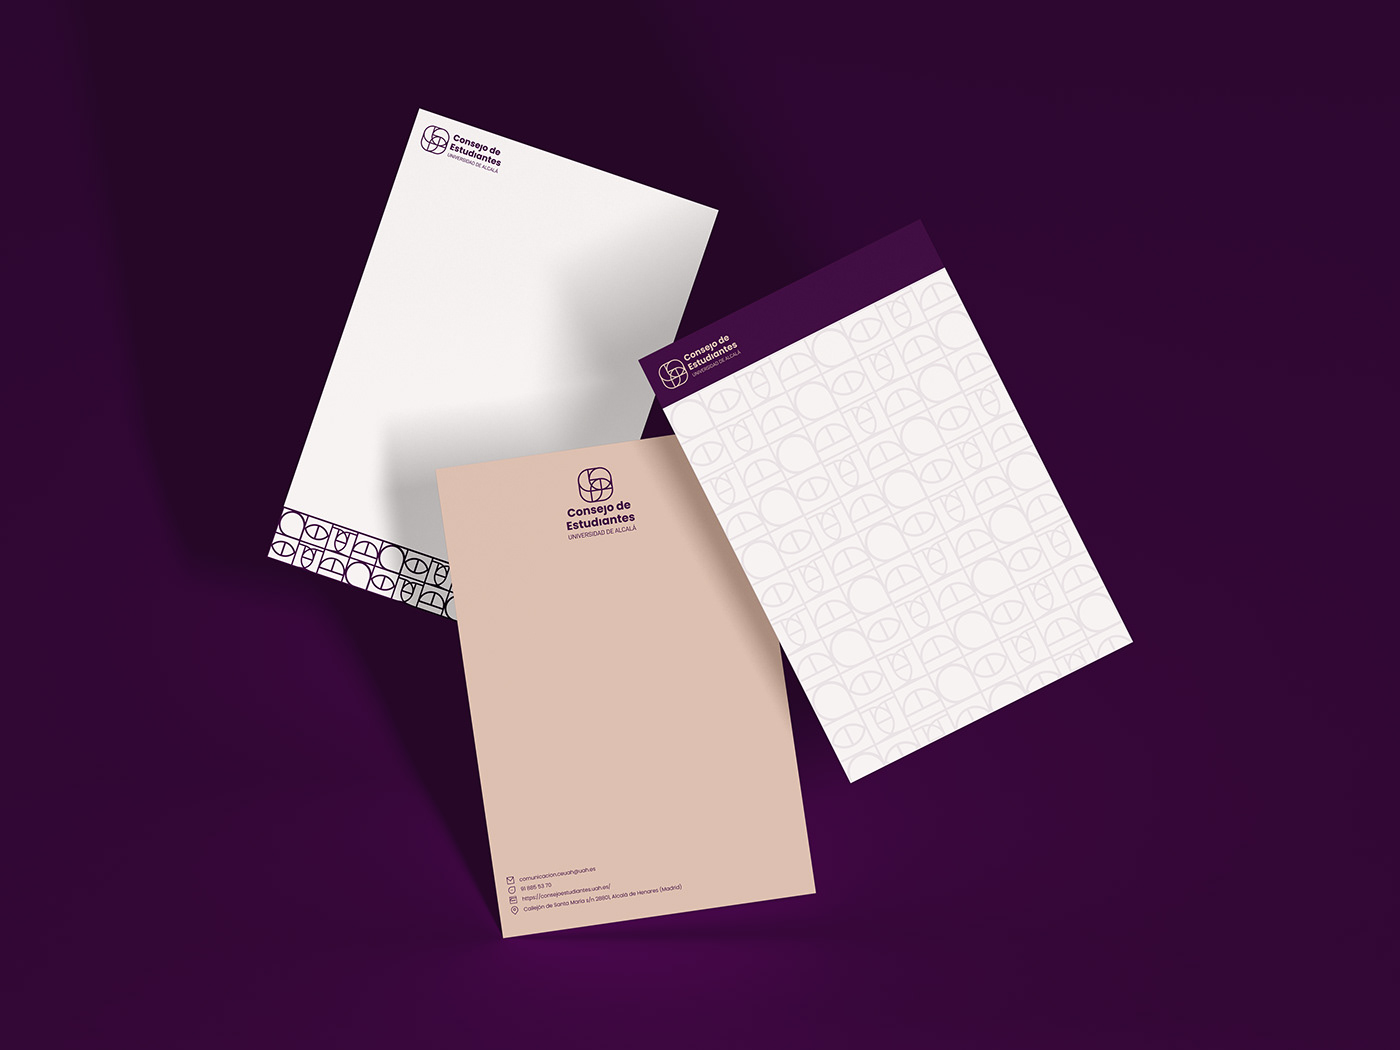 Three examples of graphic design for different letterheads for the University of Alcalá